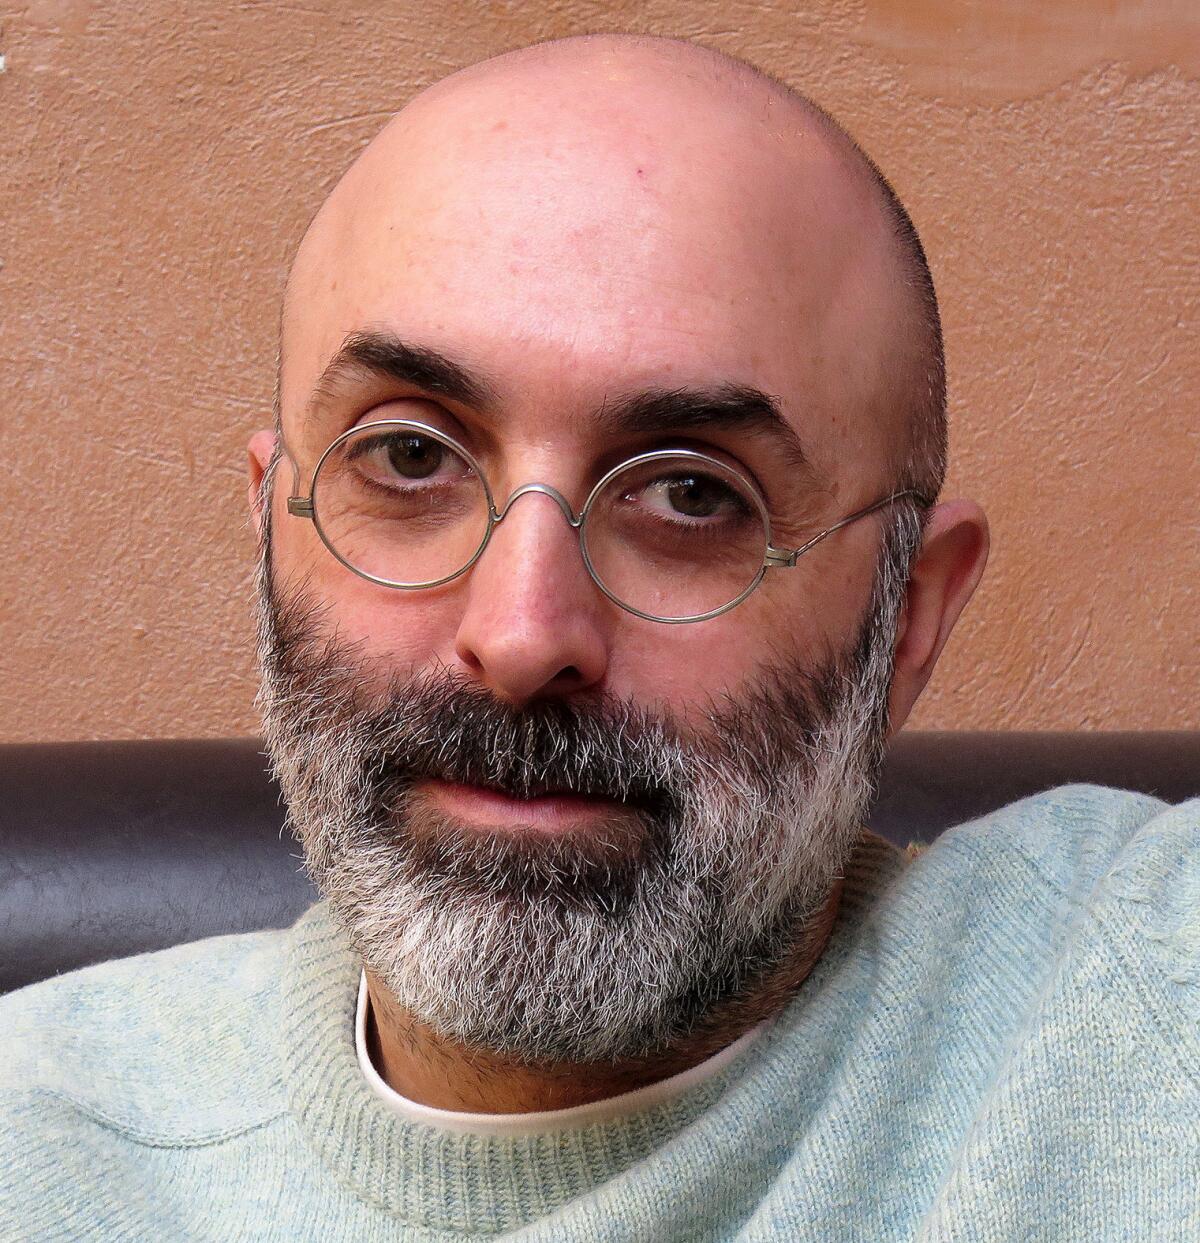 A man with a beard and glasses.